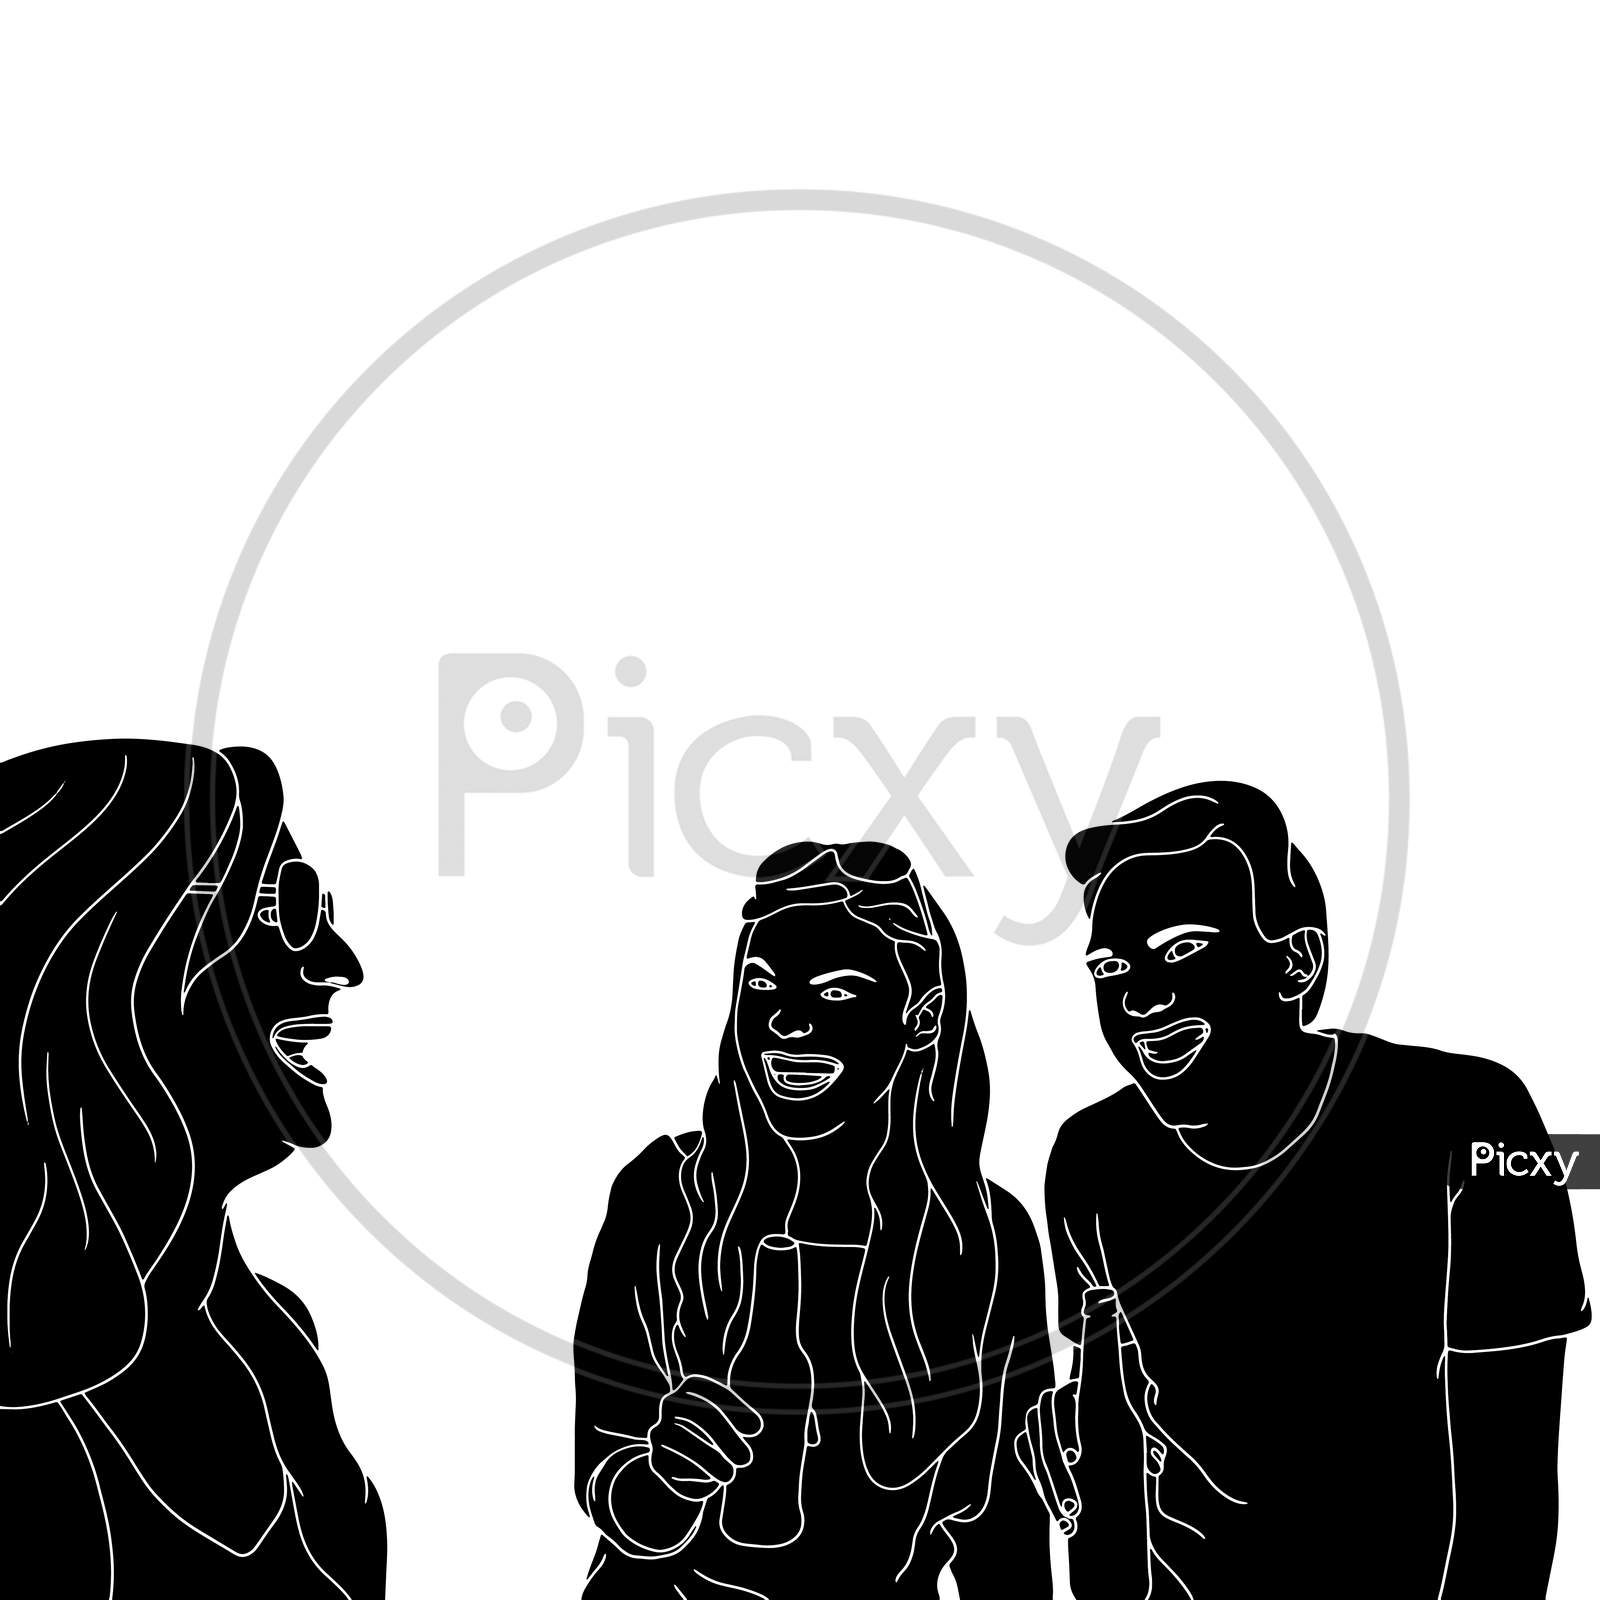 A Group Of Friends Having Outdoor Fun, Friends Time, The Silhouette Of People For Friendship Day. Hand-Drawn Character Illustration Of Happy People.